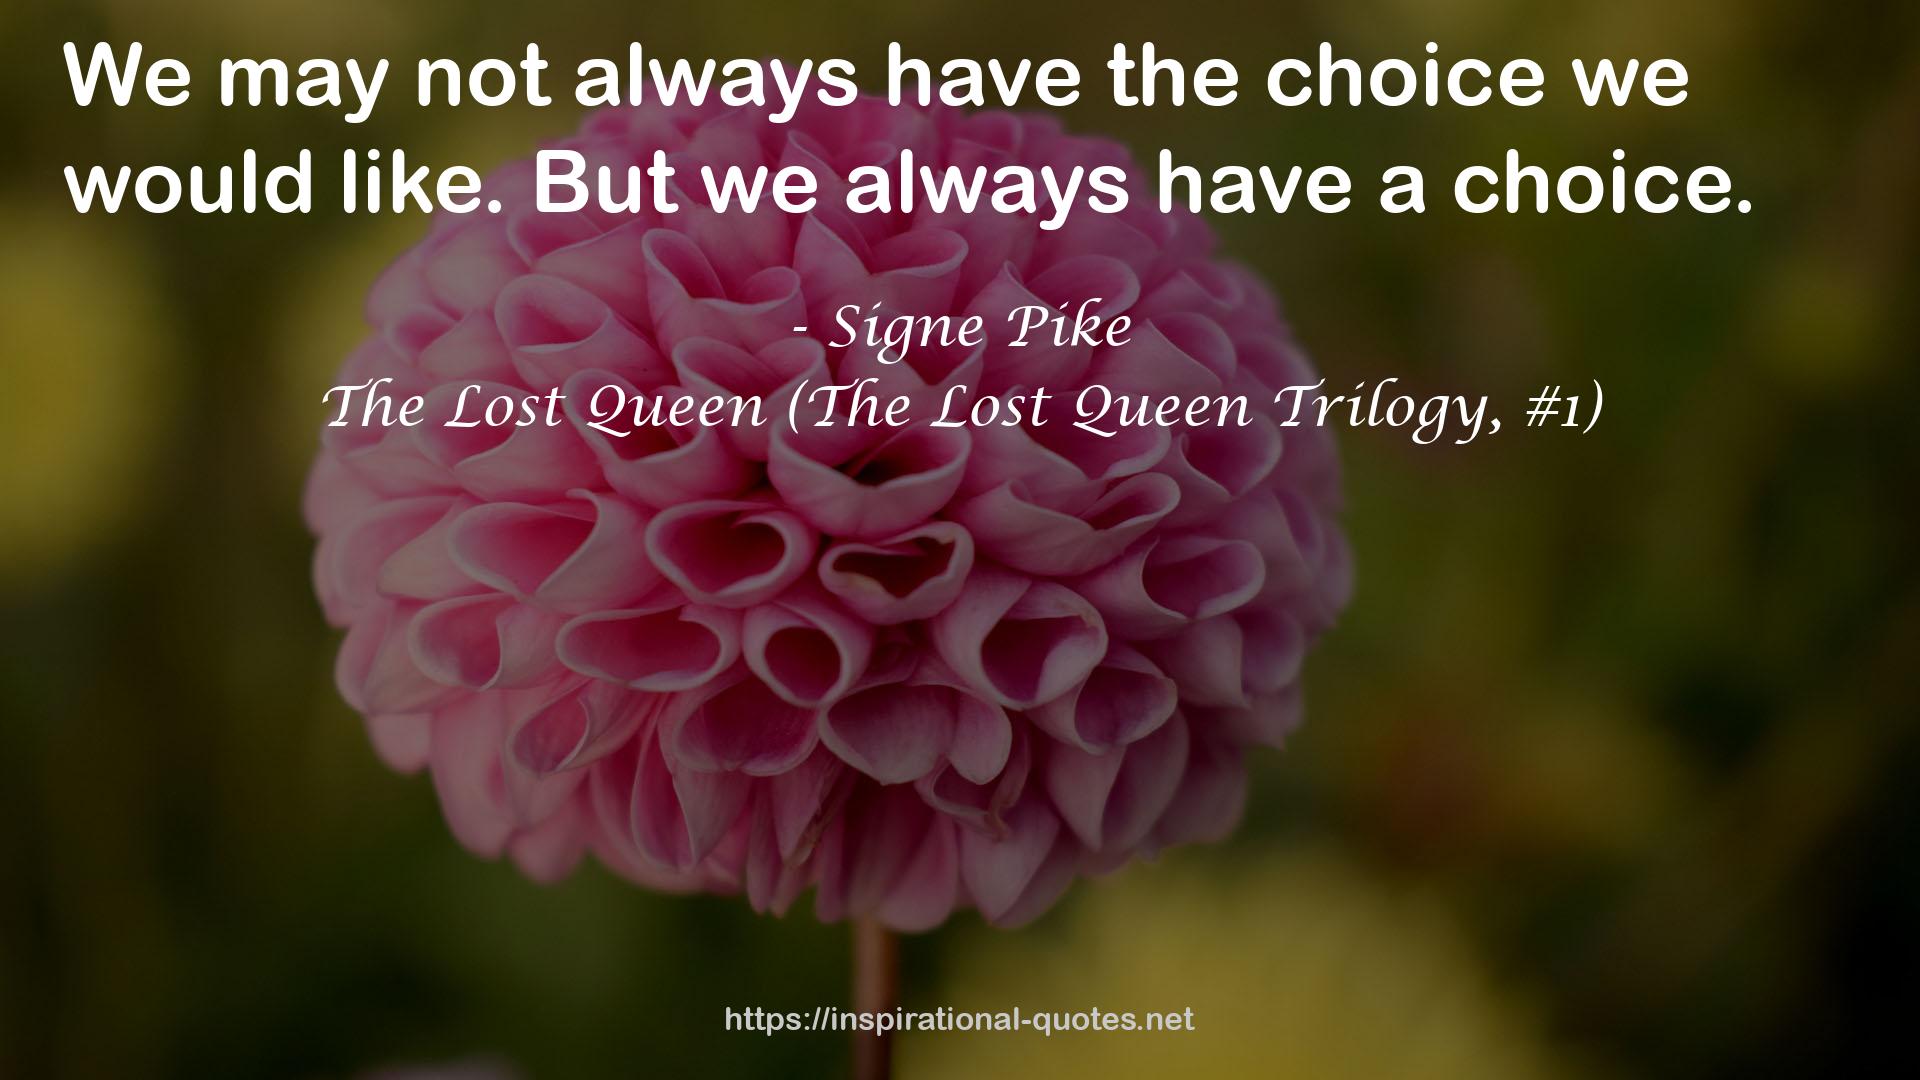 The Lost Queen (The Lost Queen Trilogy, #1) QUOTES